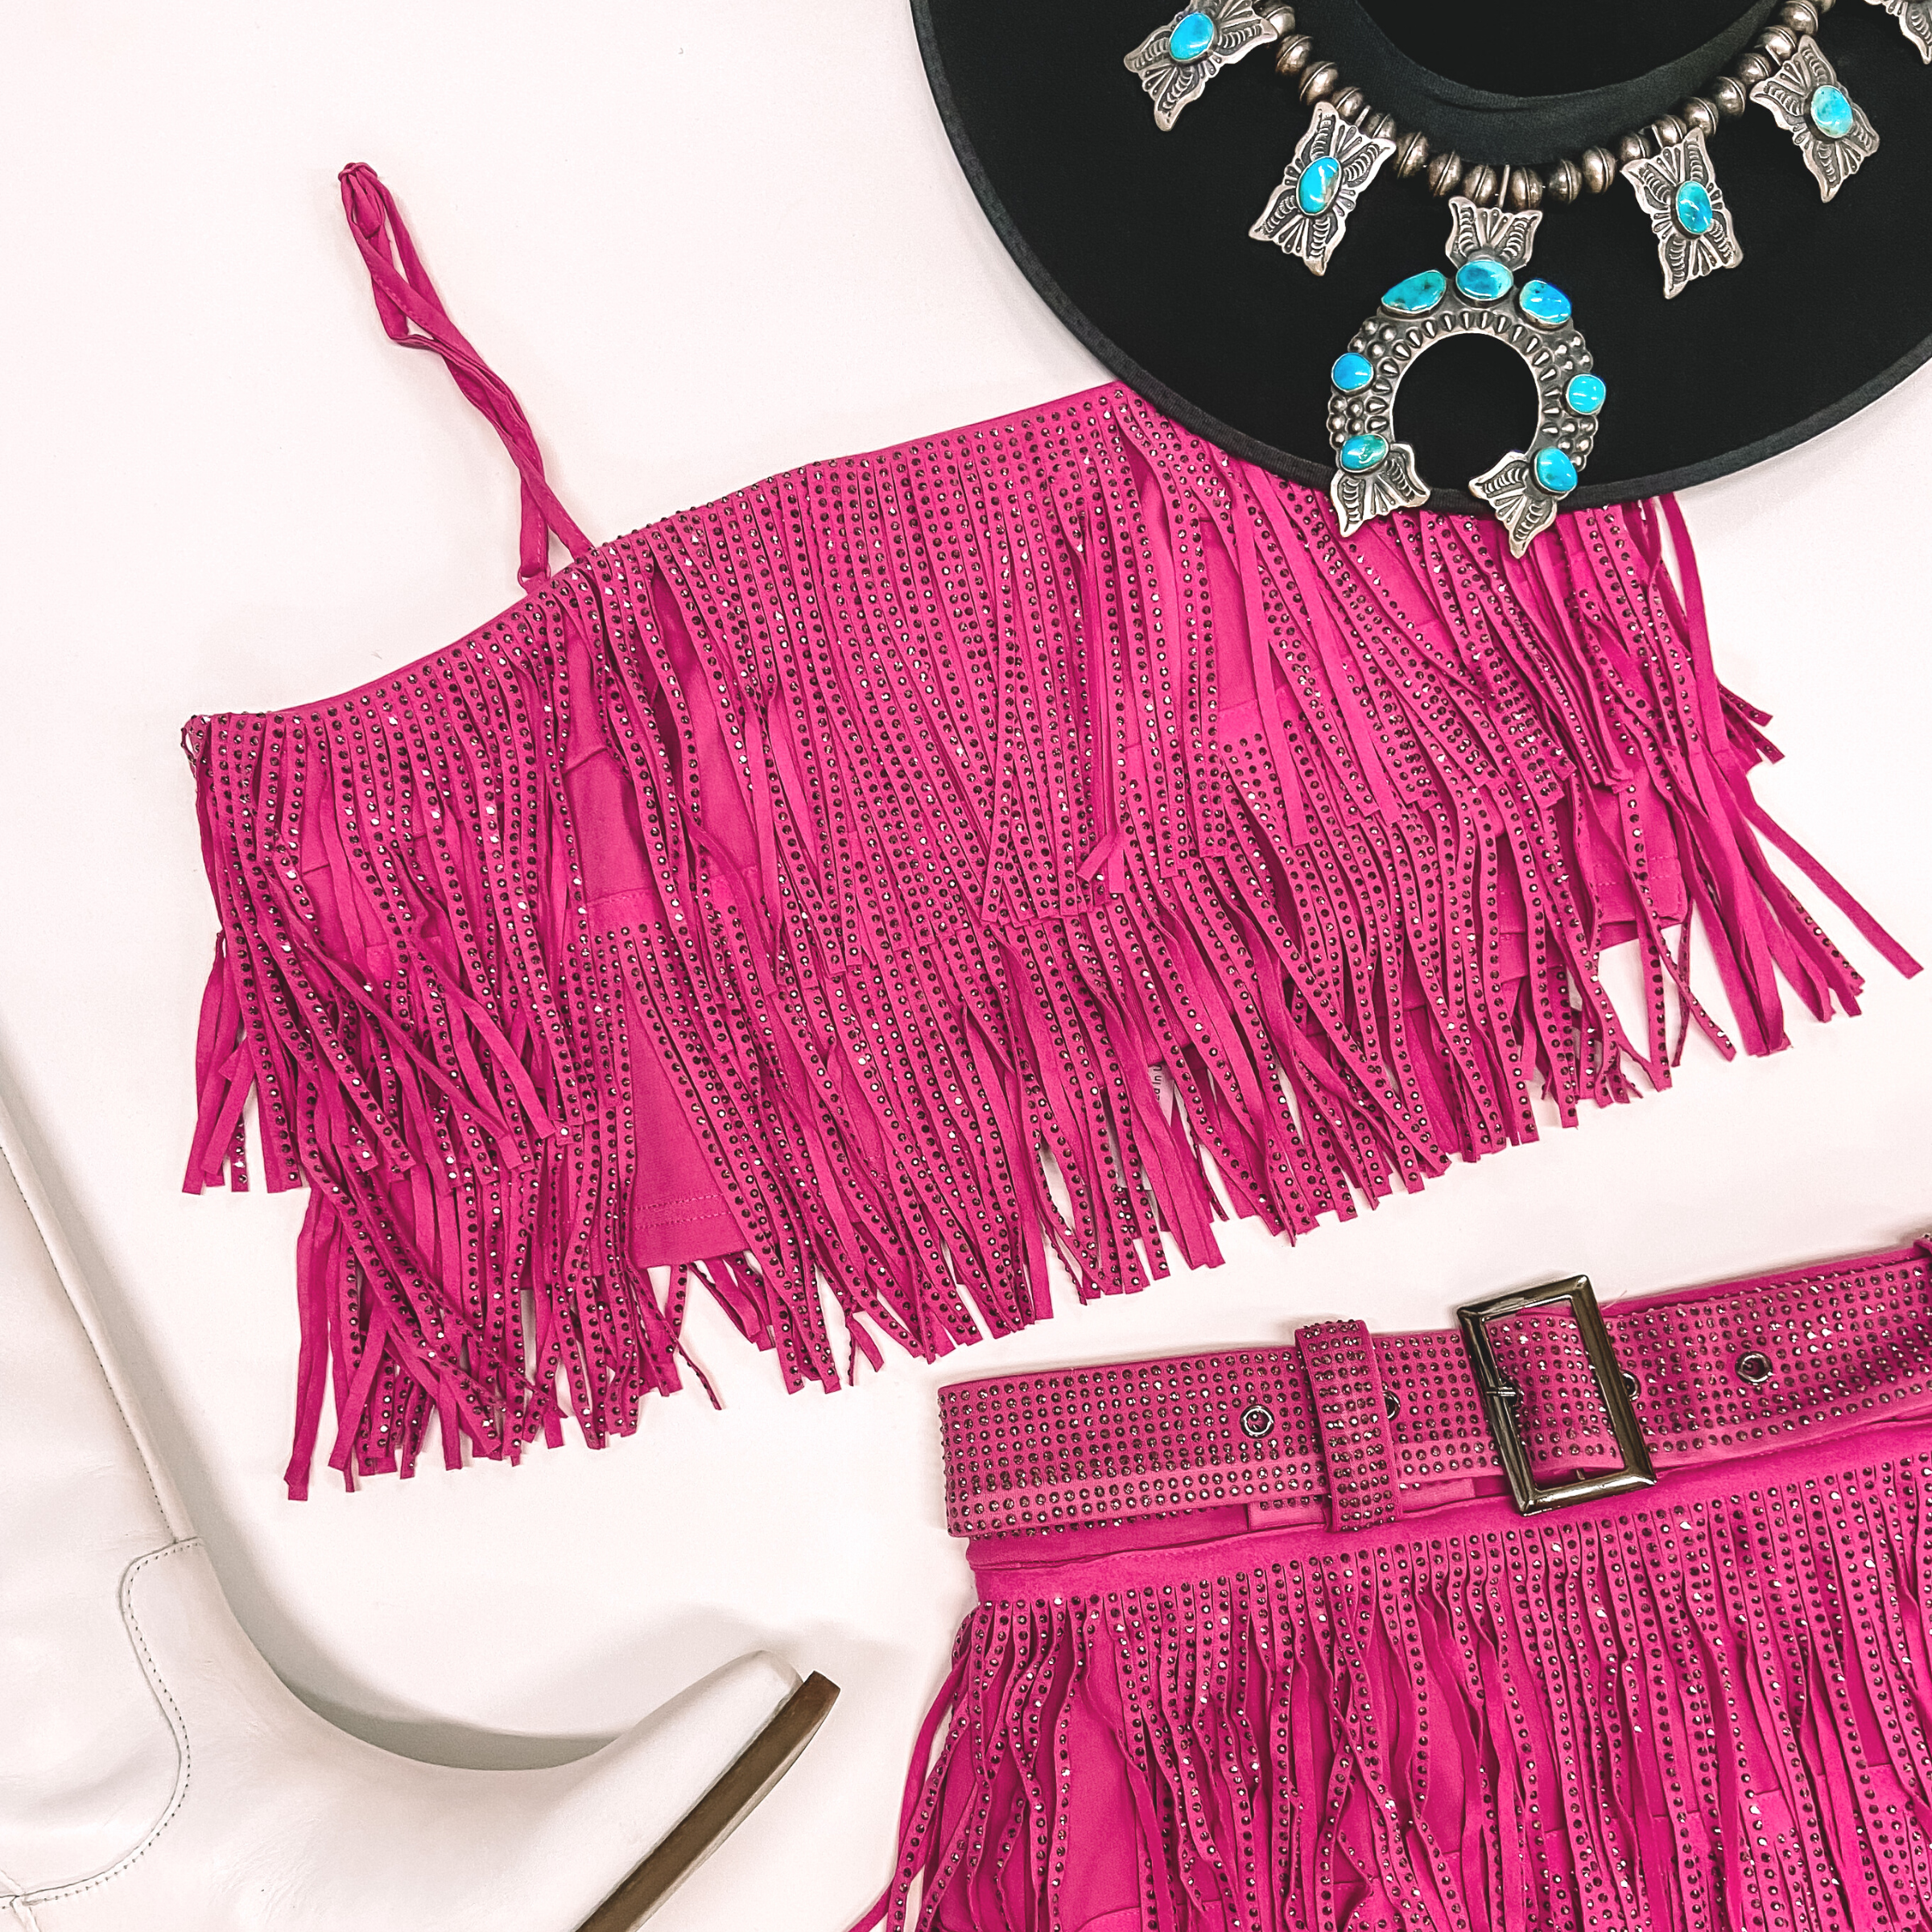 A pink crystal fringe crop top with adjustable spaghetti straps pictured on a white background with white boots, a black hat, and turquoise jewelry.